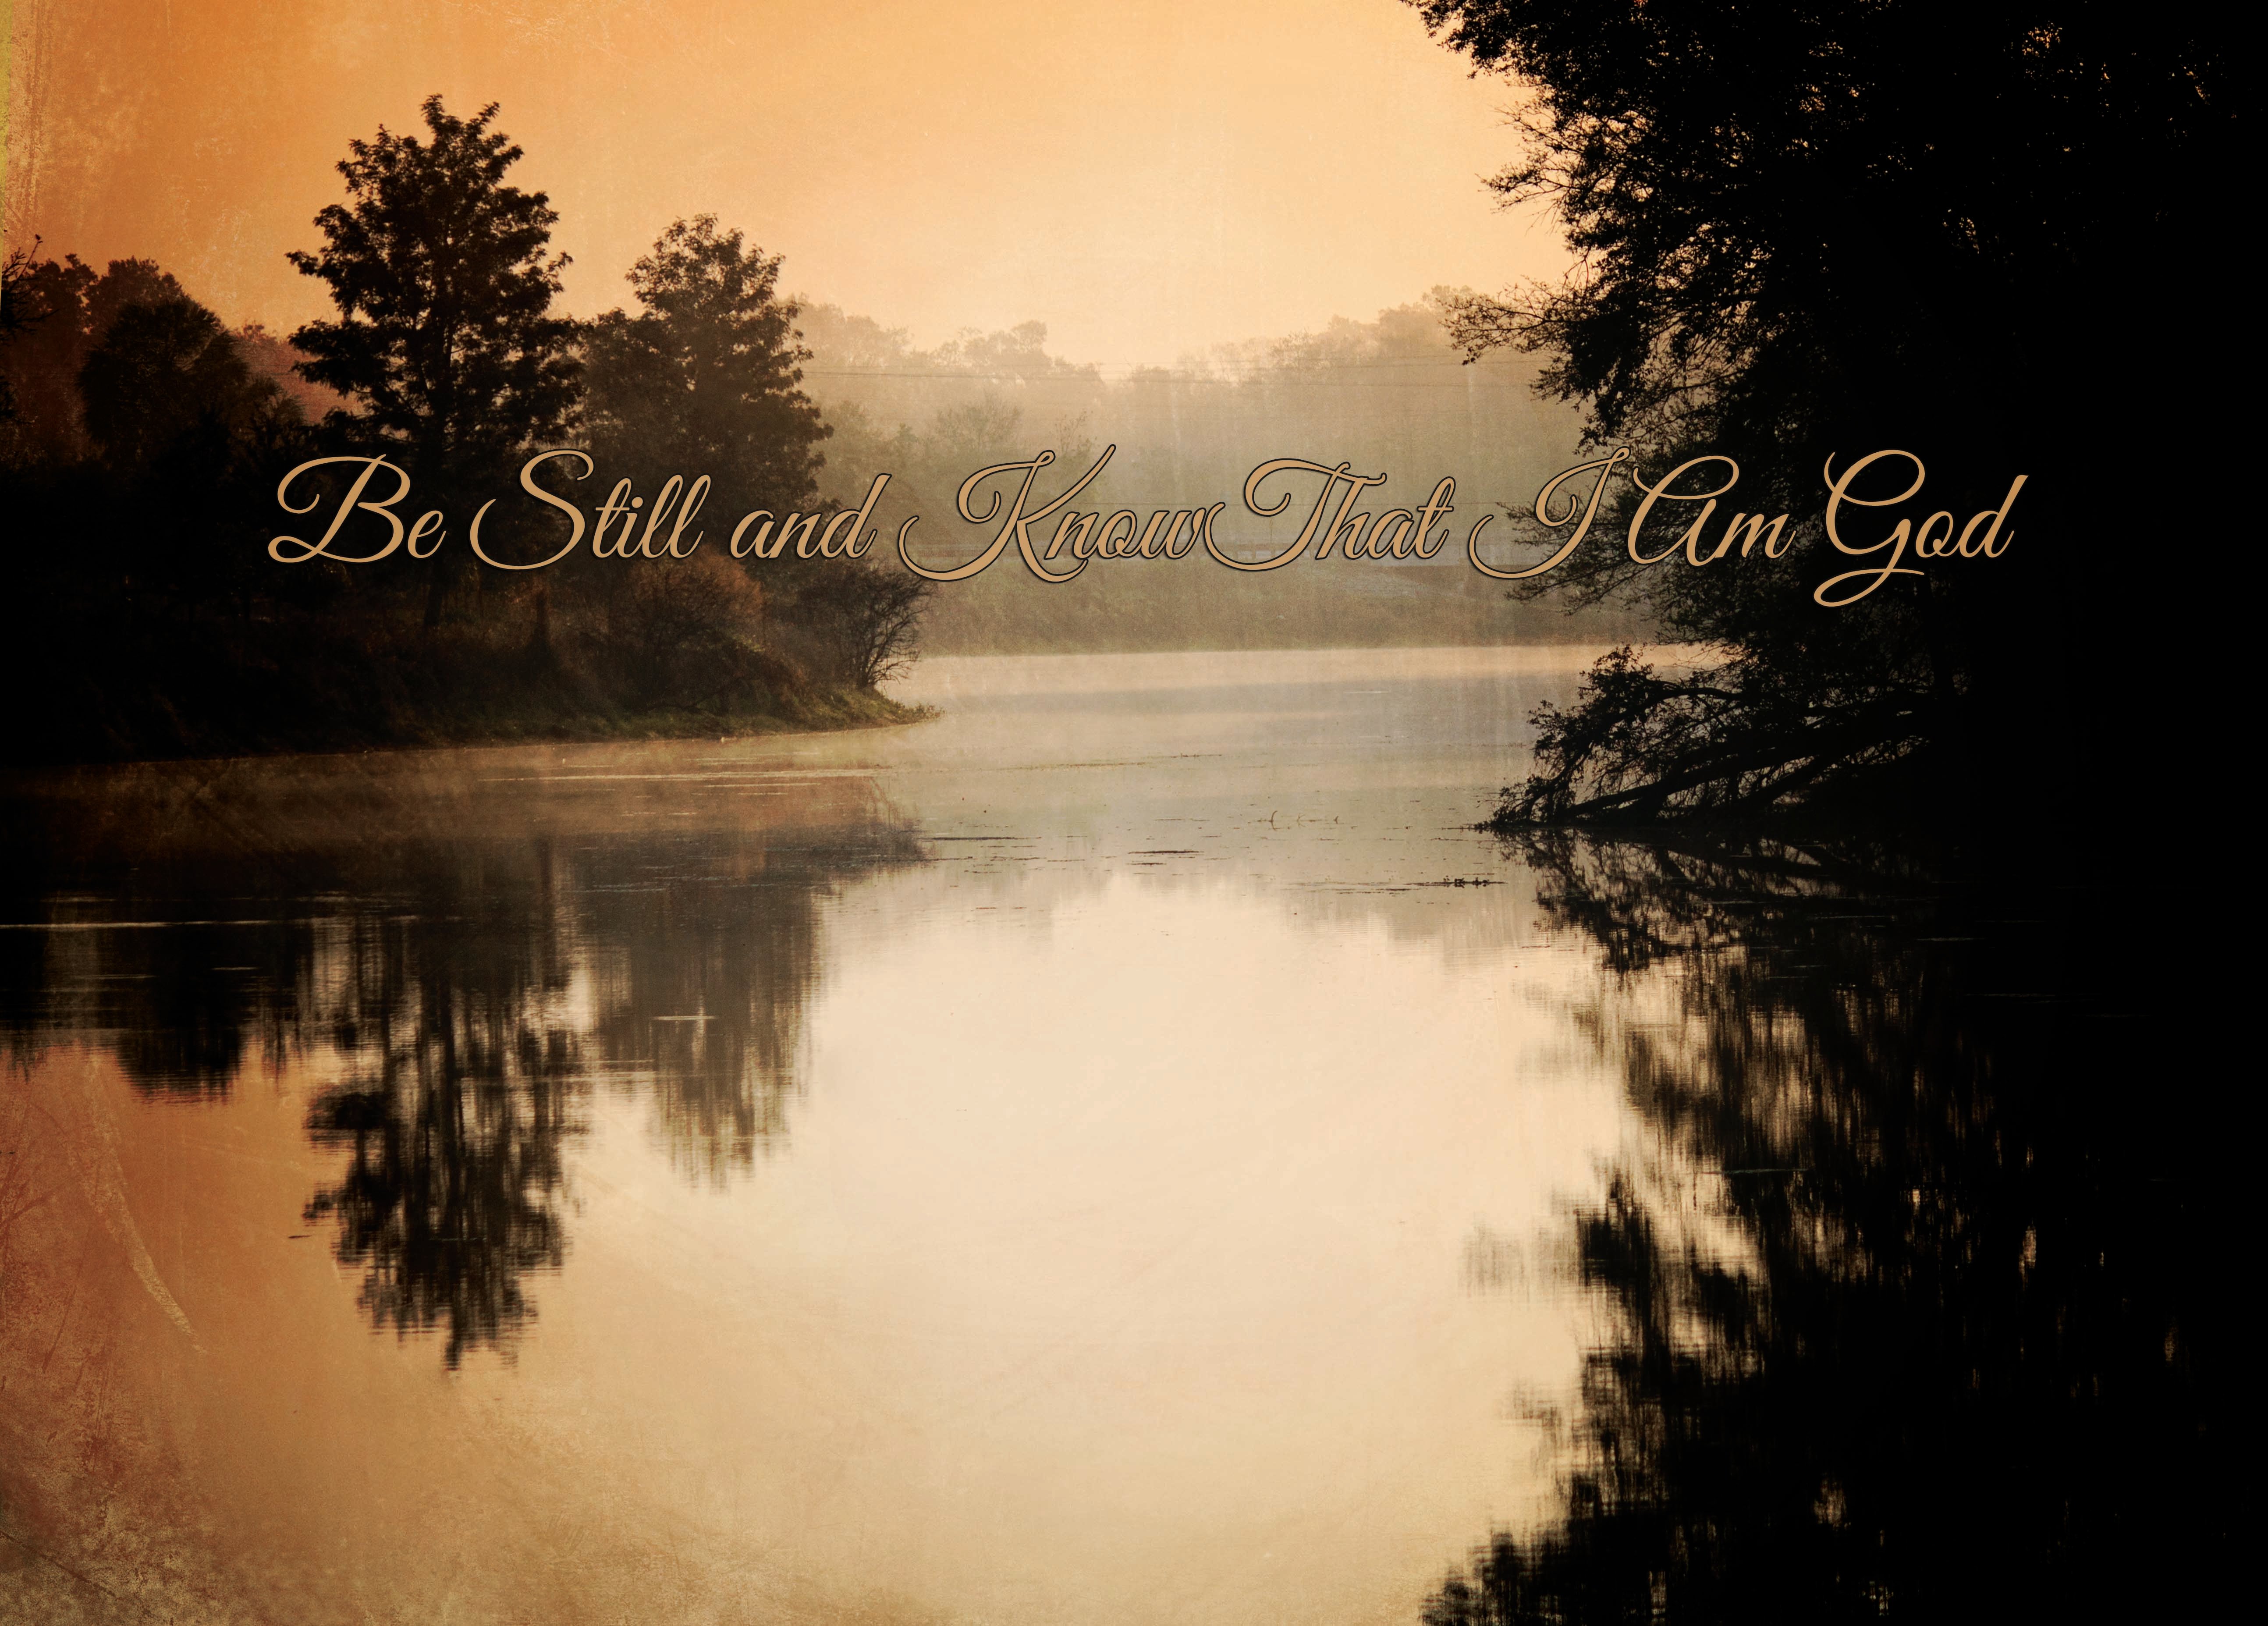 Be Still and Know That I Am God Framed Print 11x14 KimRon 5175x3710